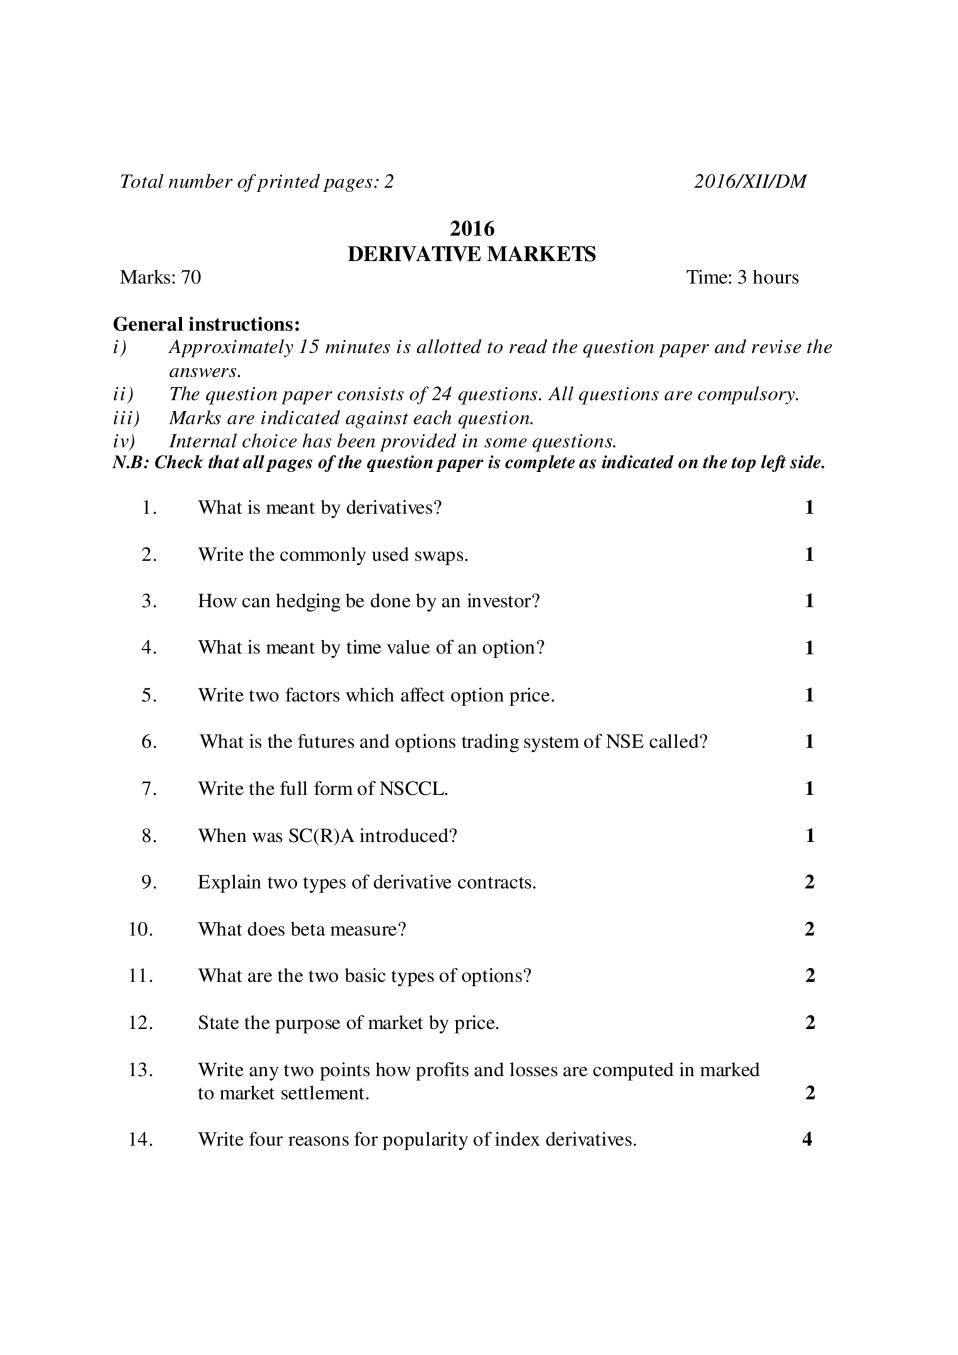 NBSE Class 12 Question Paper 2016 for Derivative Markets - Page 1